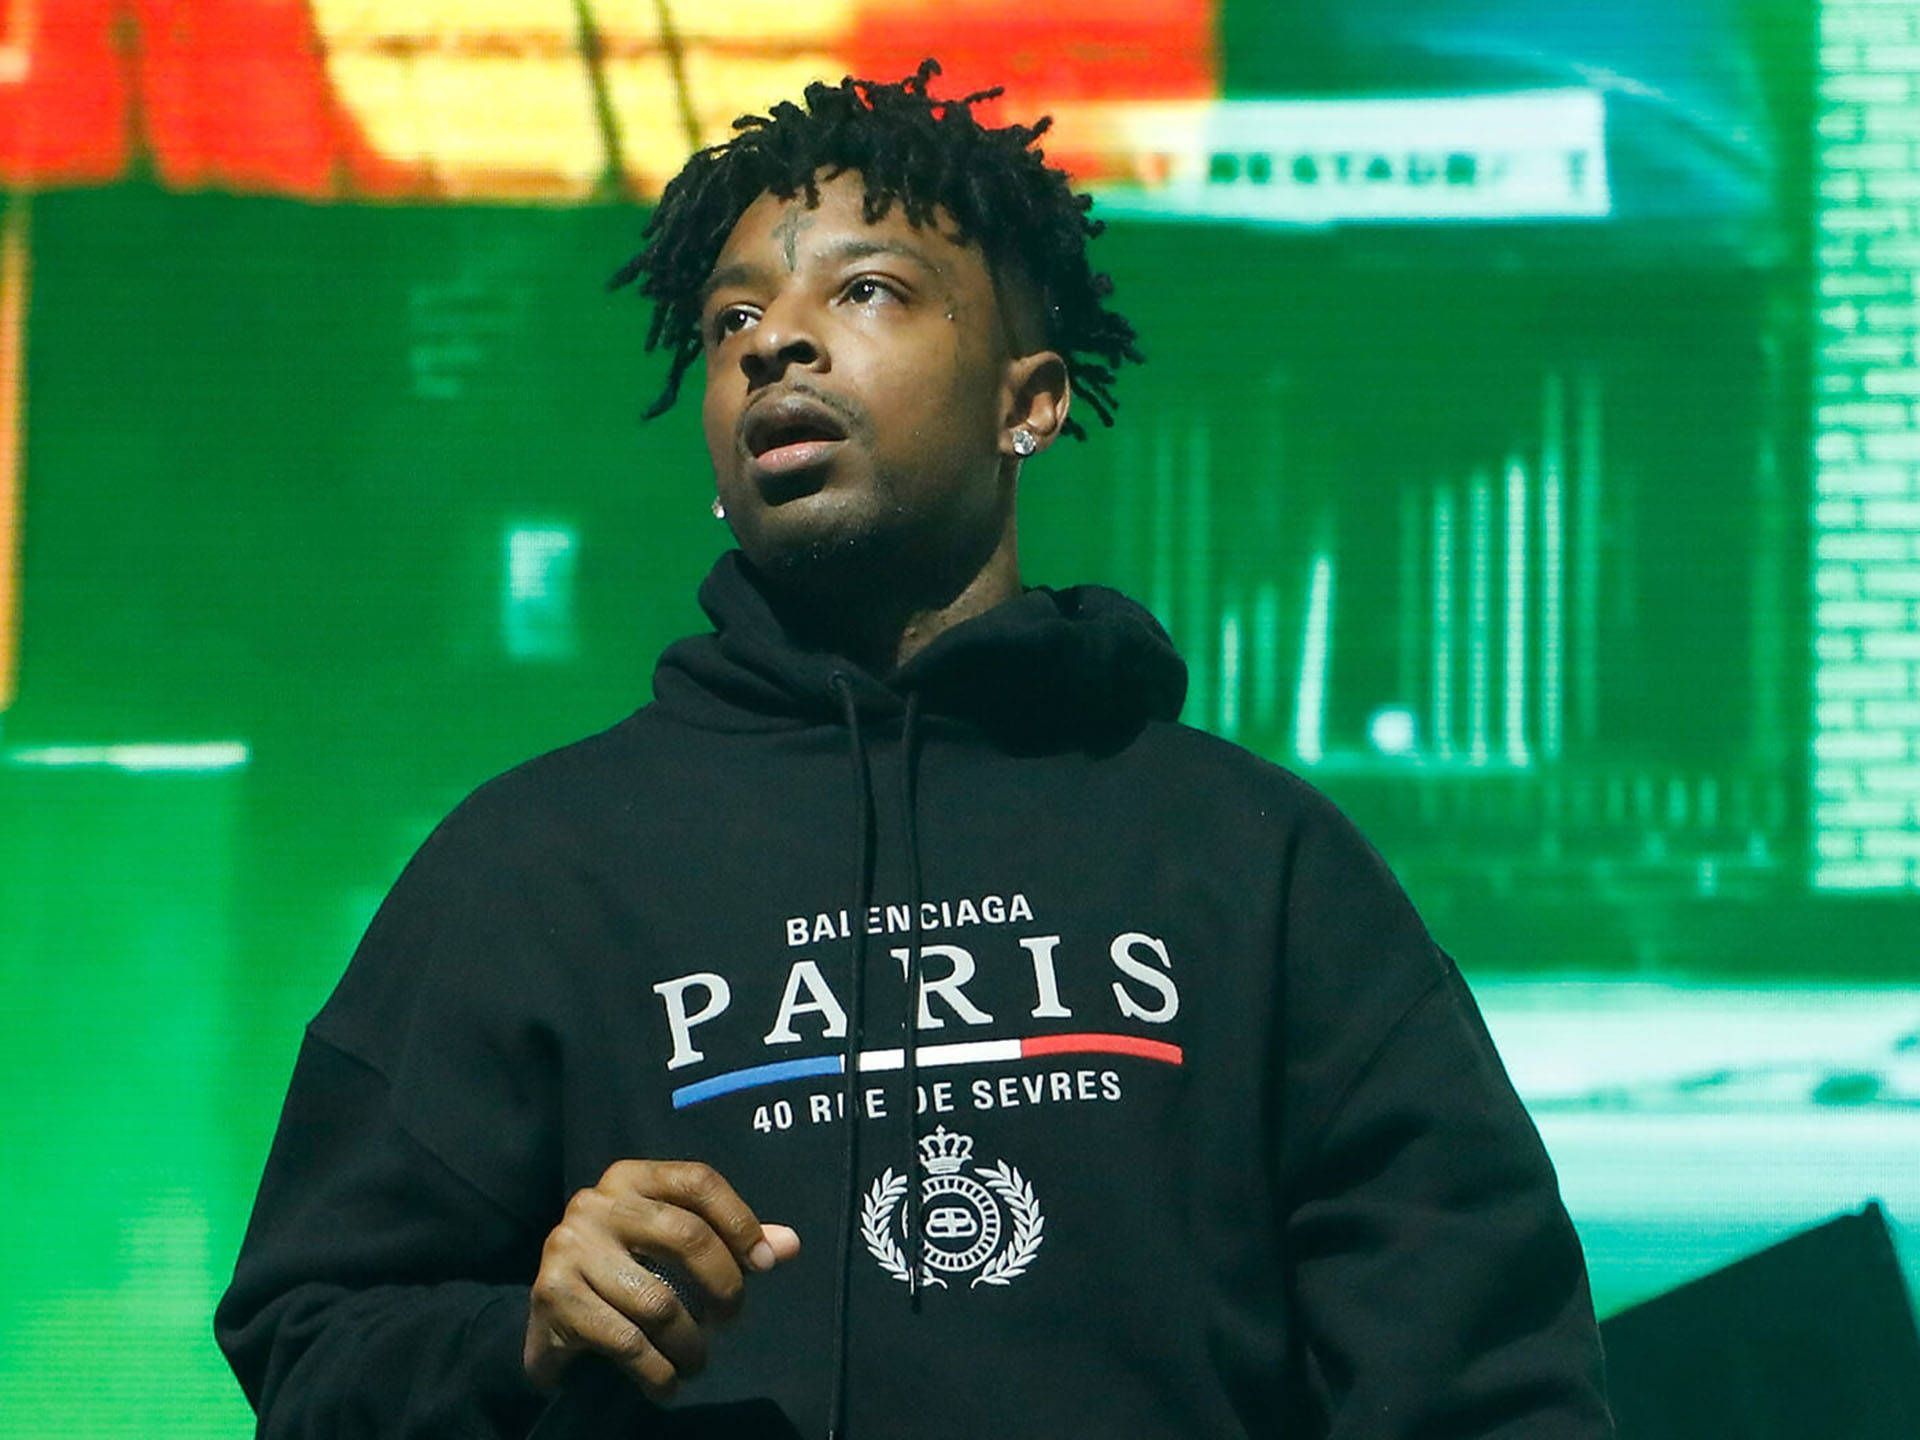 Download 21 Savage Forbes Event Wallpaper